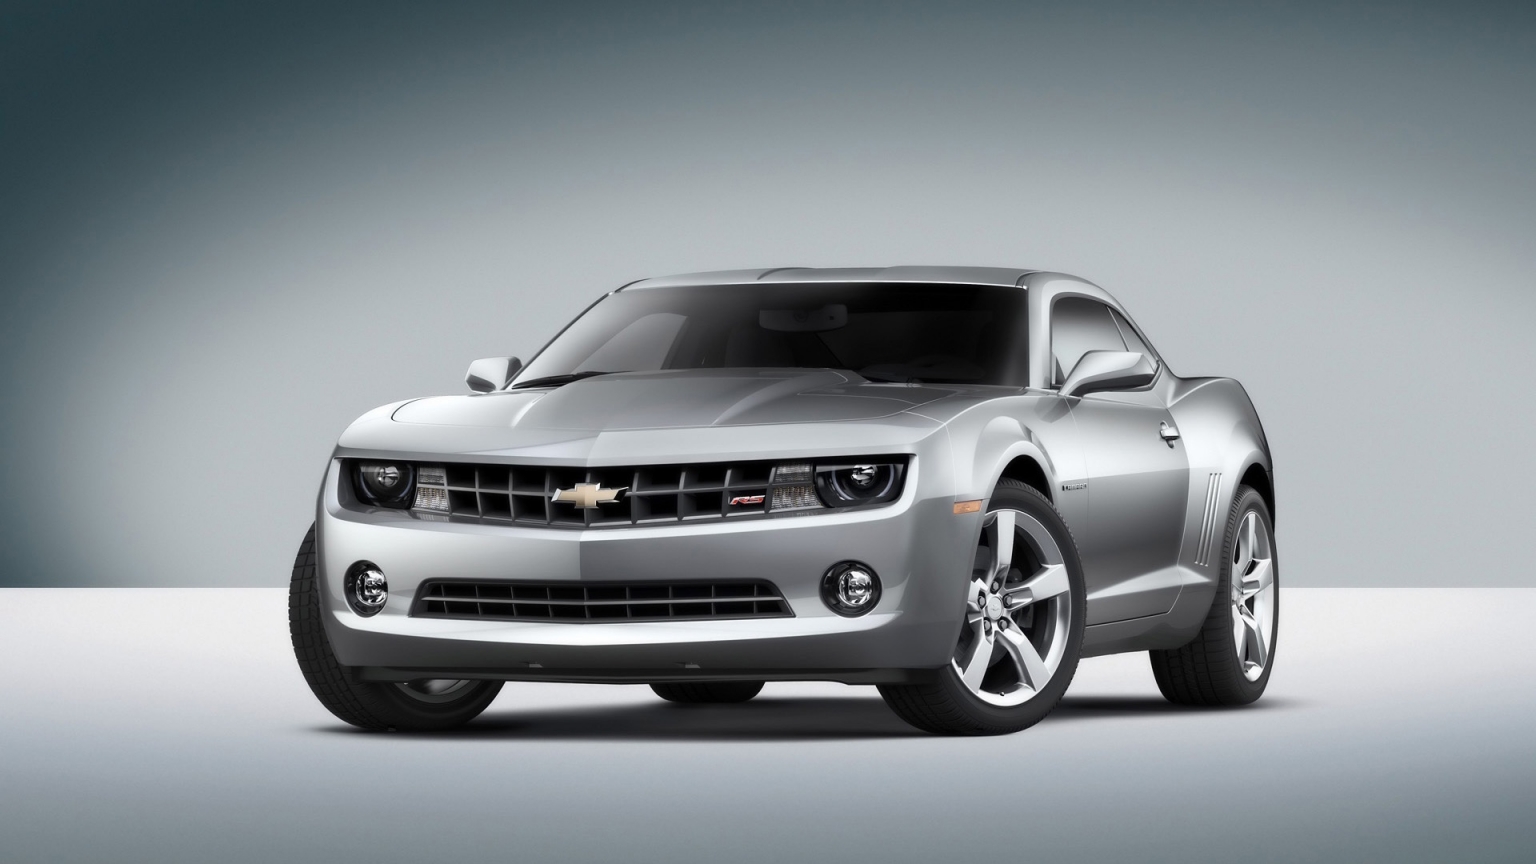 Chevrolet Camaro RS 2010 Grey Front Angle for 1536 x 864 HDTV resolution